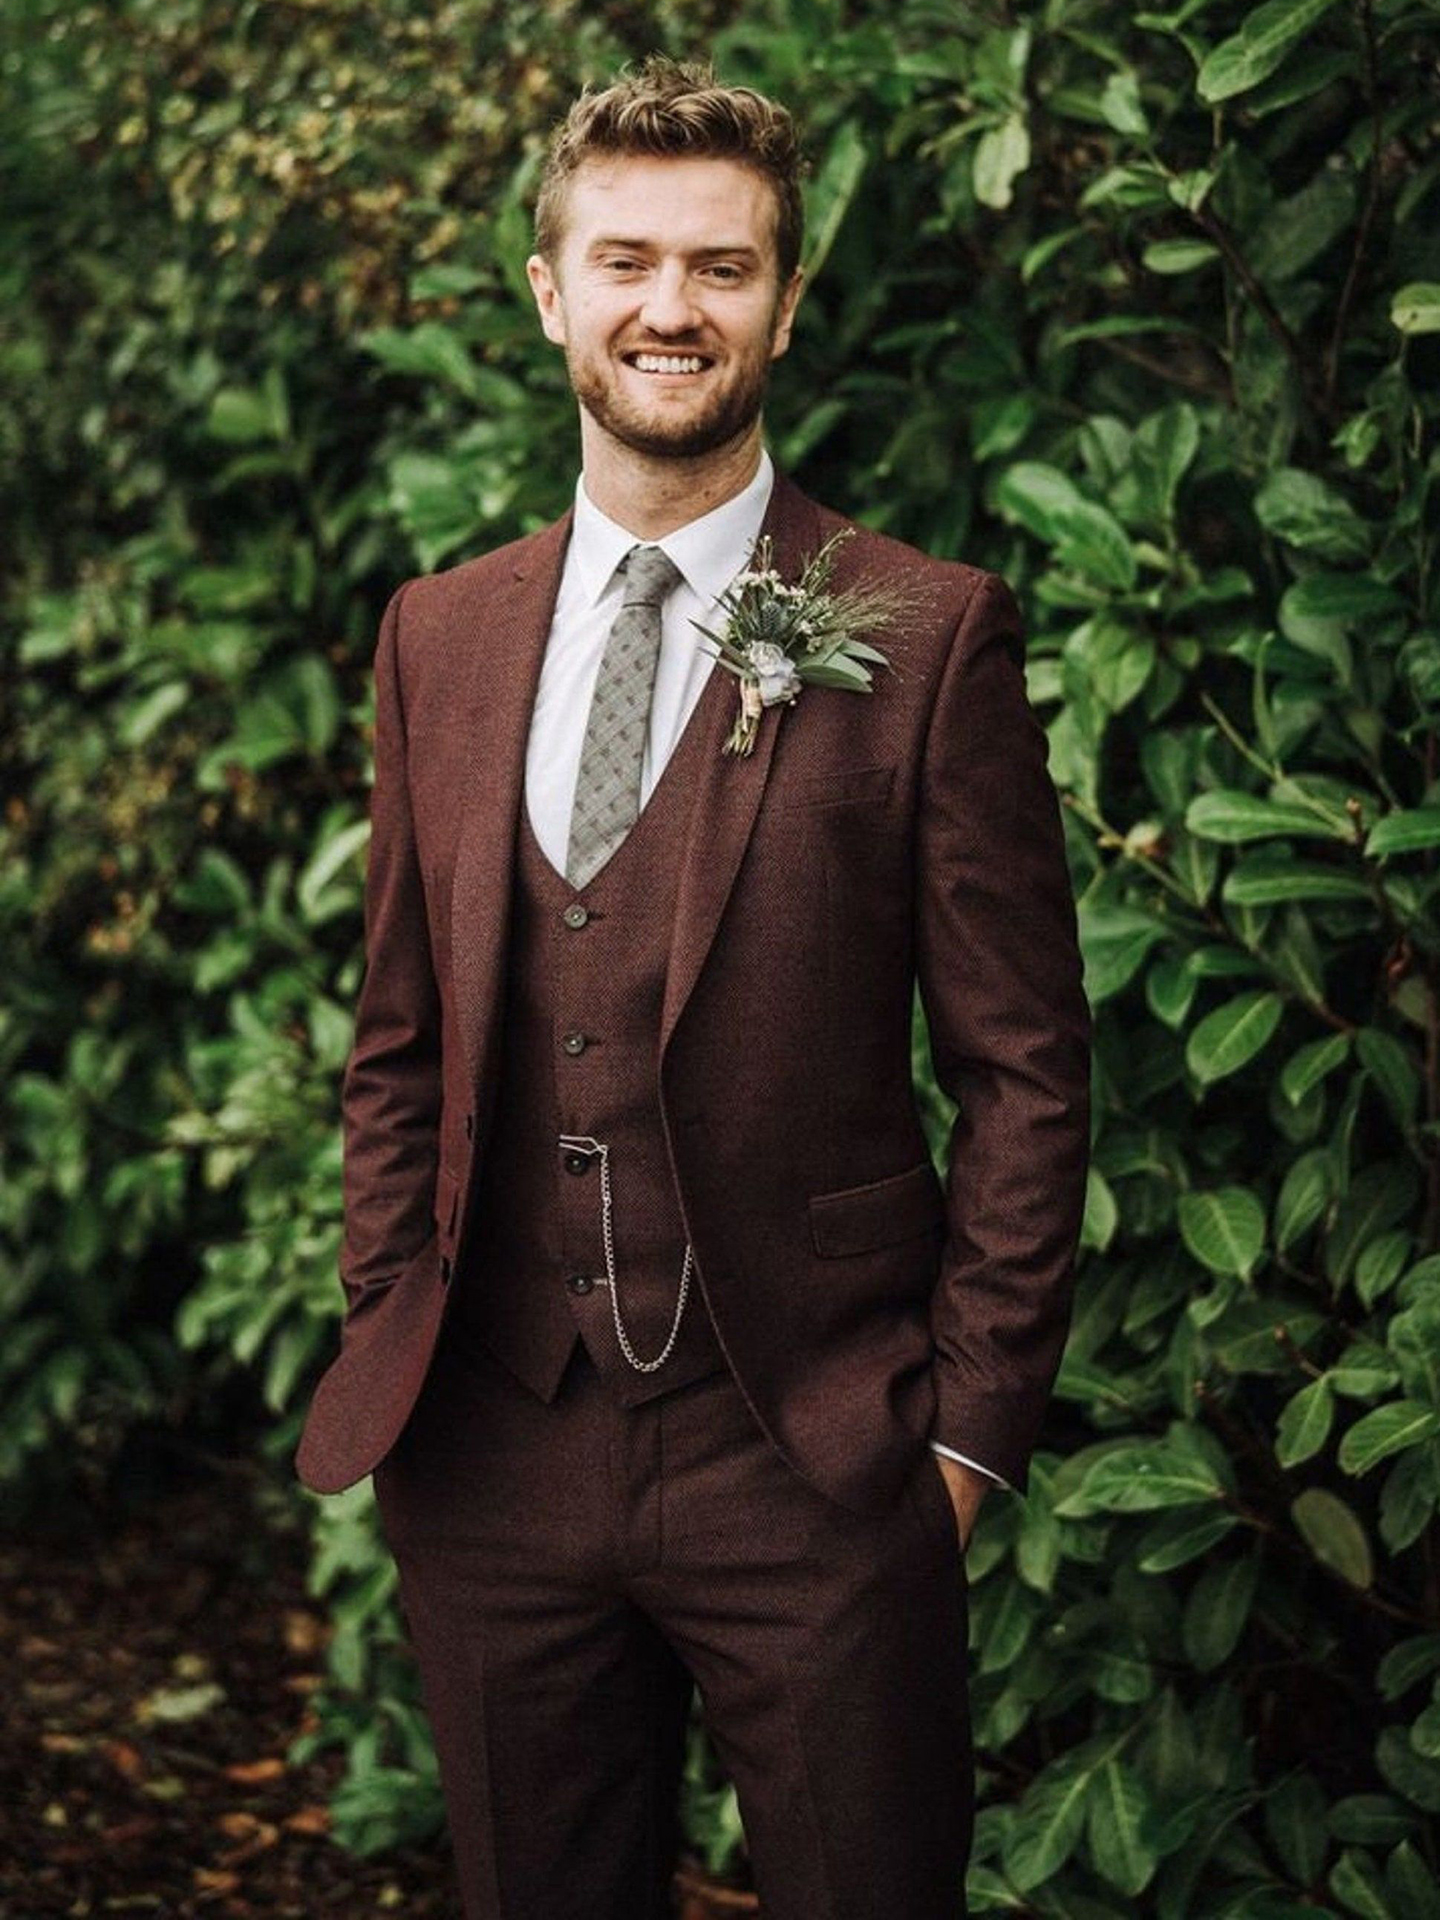 Wearing a maroon suit with a white shirt and olive tie at a wedding